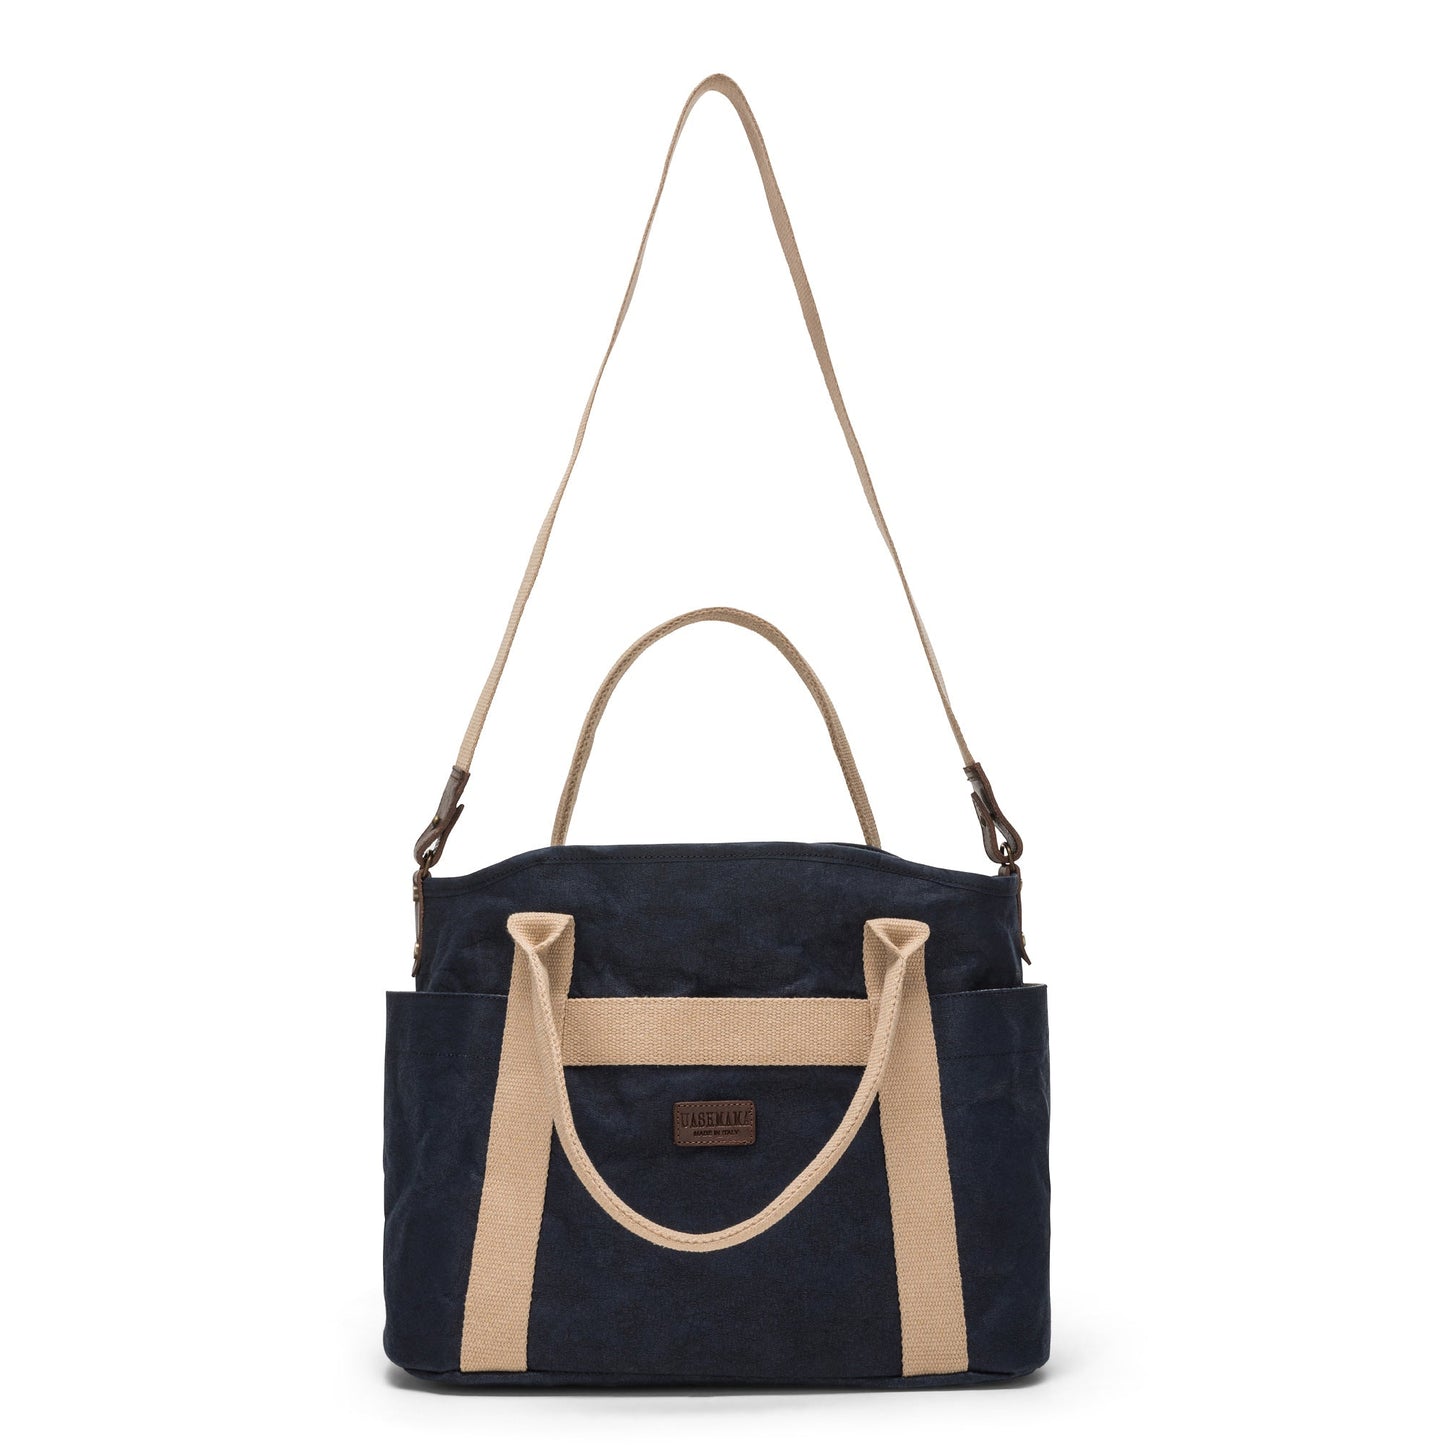 A large washable paper shopper bag is shown from a front angle. It features a long canvas shoulder strap and two top handles. It has an external pocket running the length of the bag, and the UASHMAMA logo stamped in the front. It is shown in a navy colour.